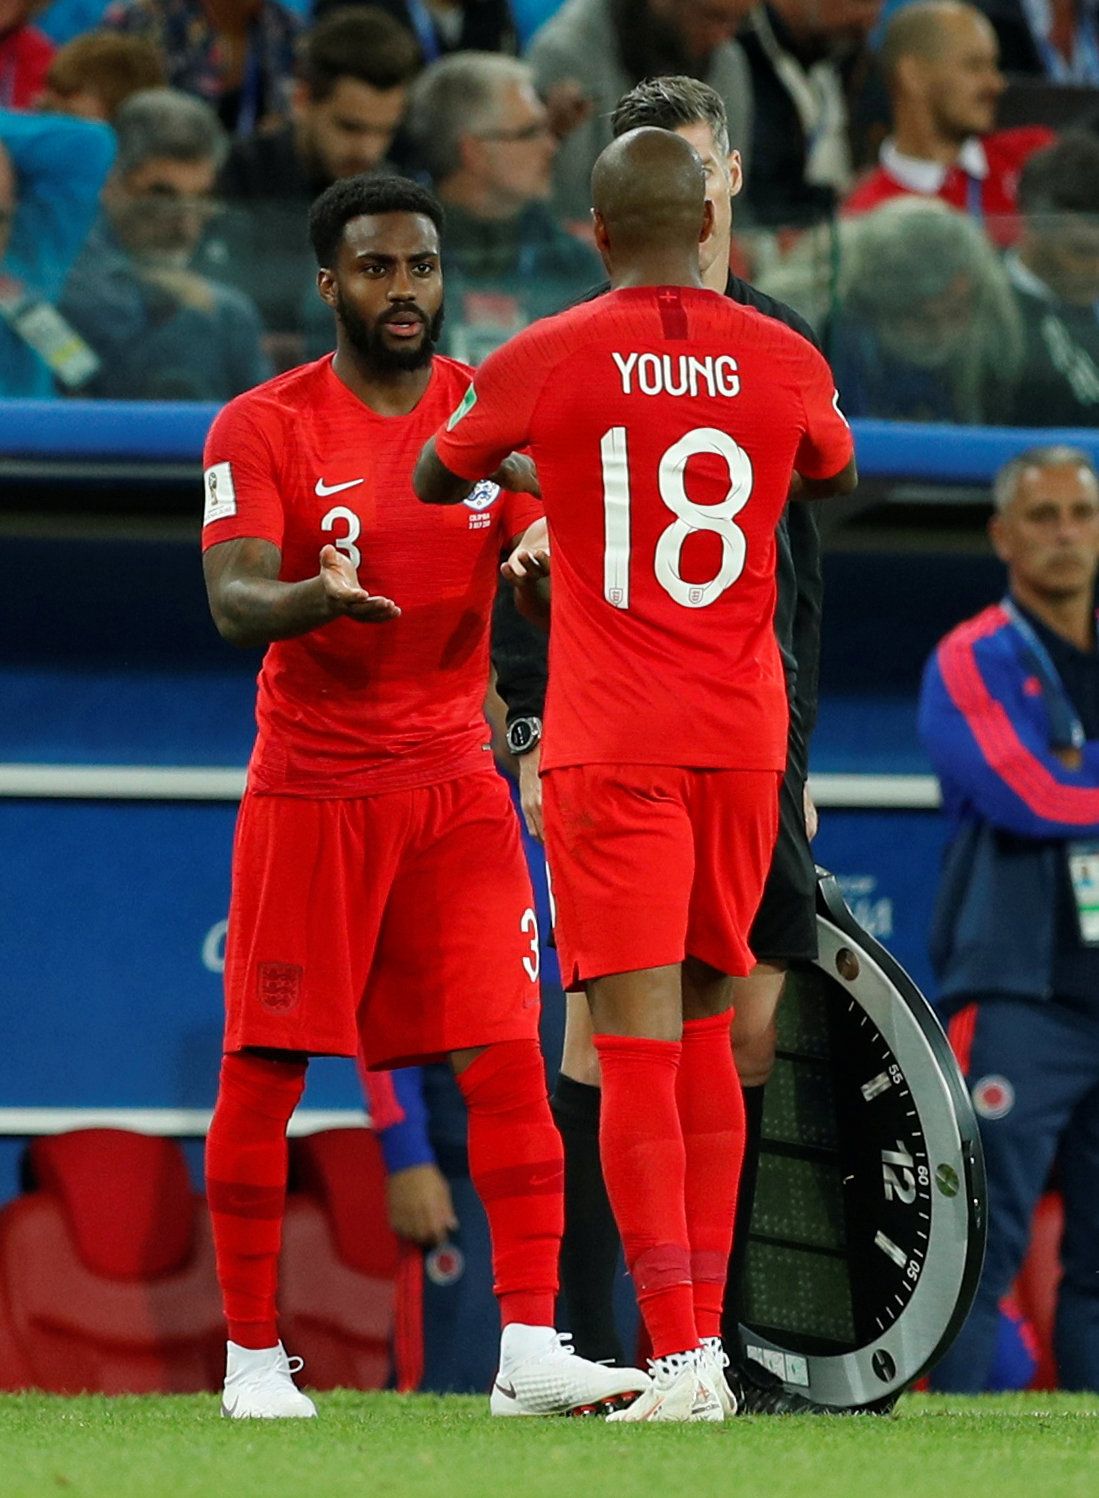 Soccer Football - World Cup - Round of 16 - Colombia vs England - Spartak Stadium, Moscow, Russia - July 3, 2018  England's Danny Rose comes on as a substitute to replace Ashley Young   REUTERS/John Sibley